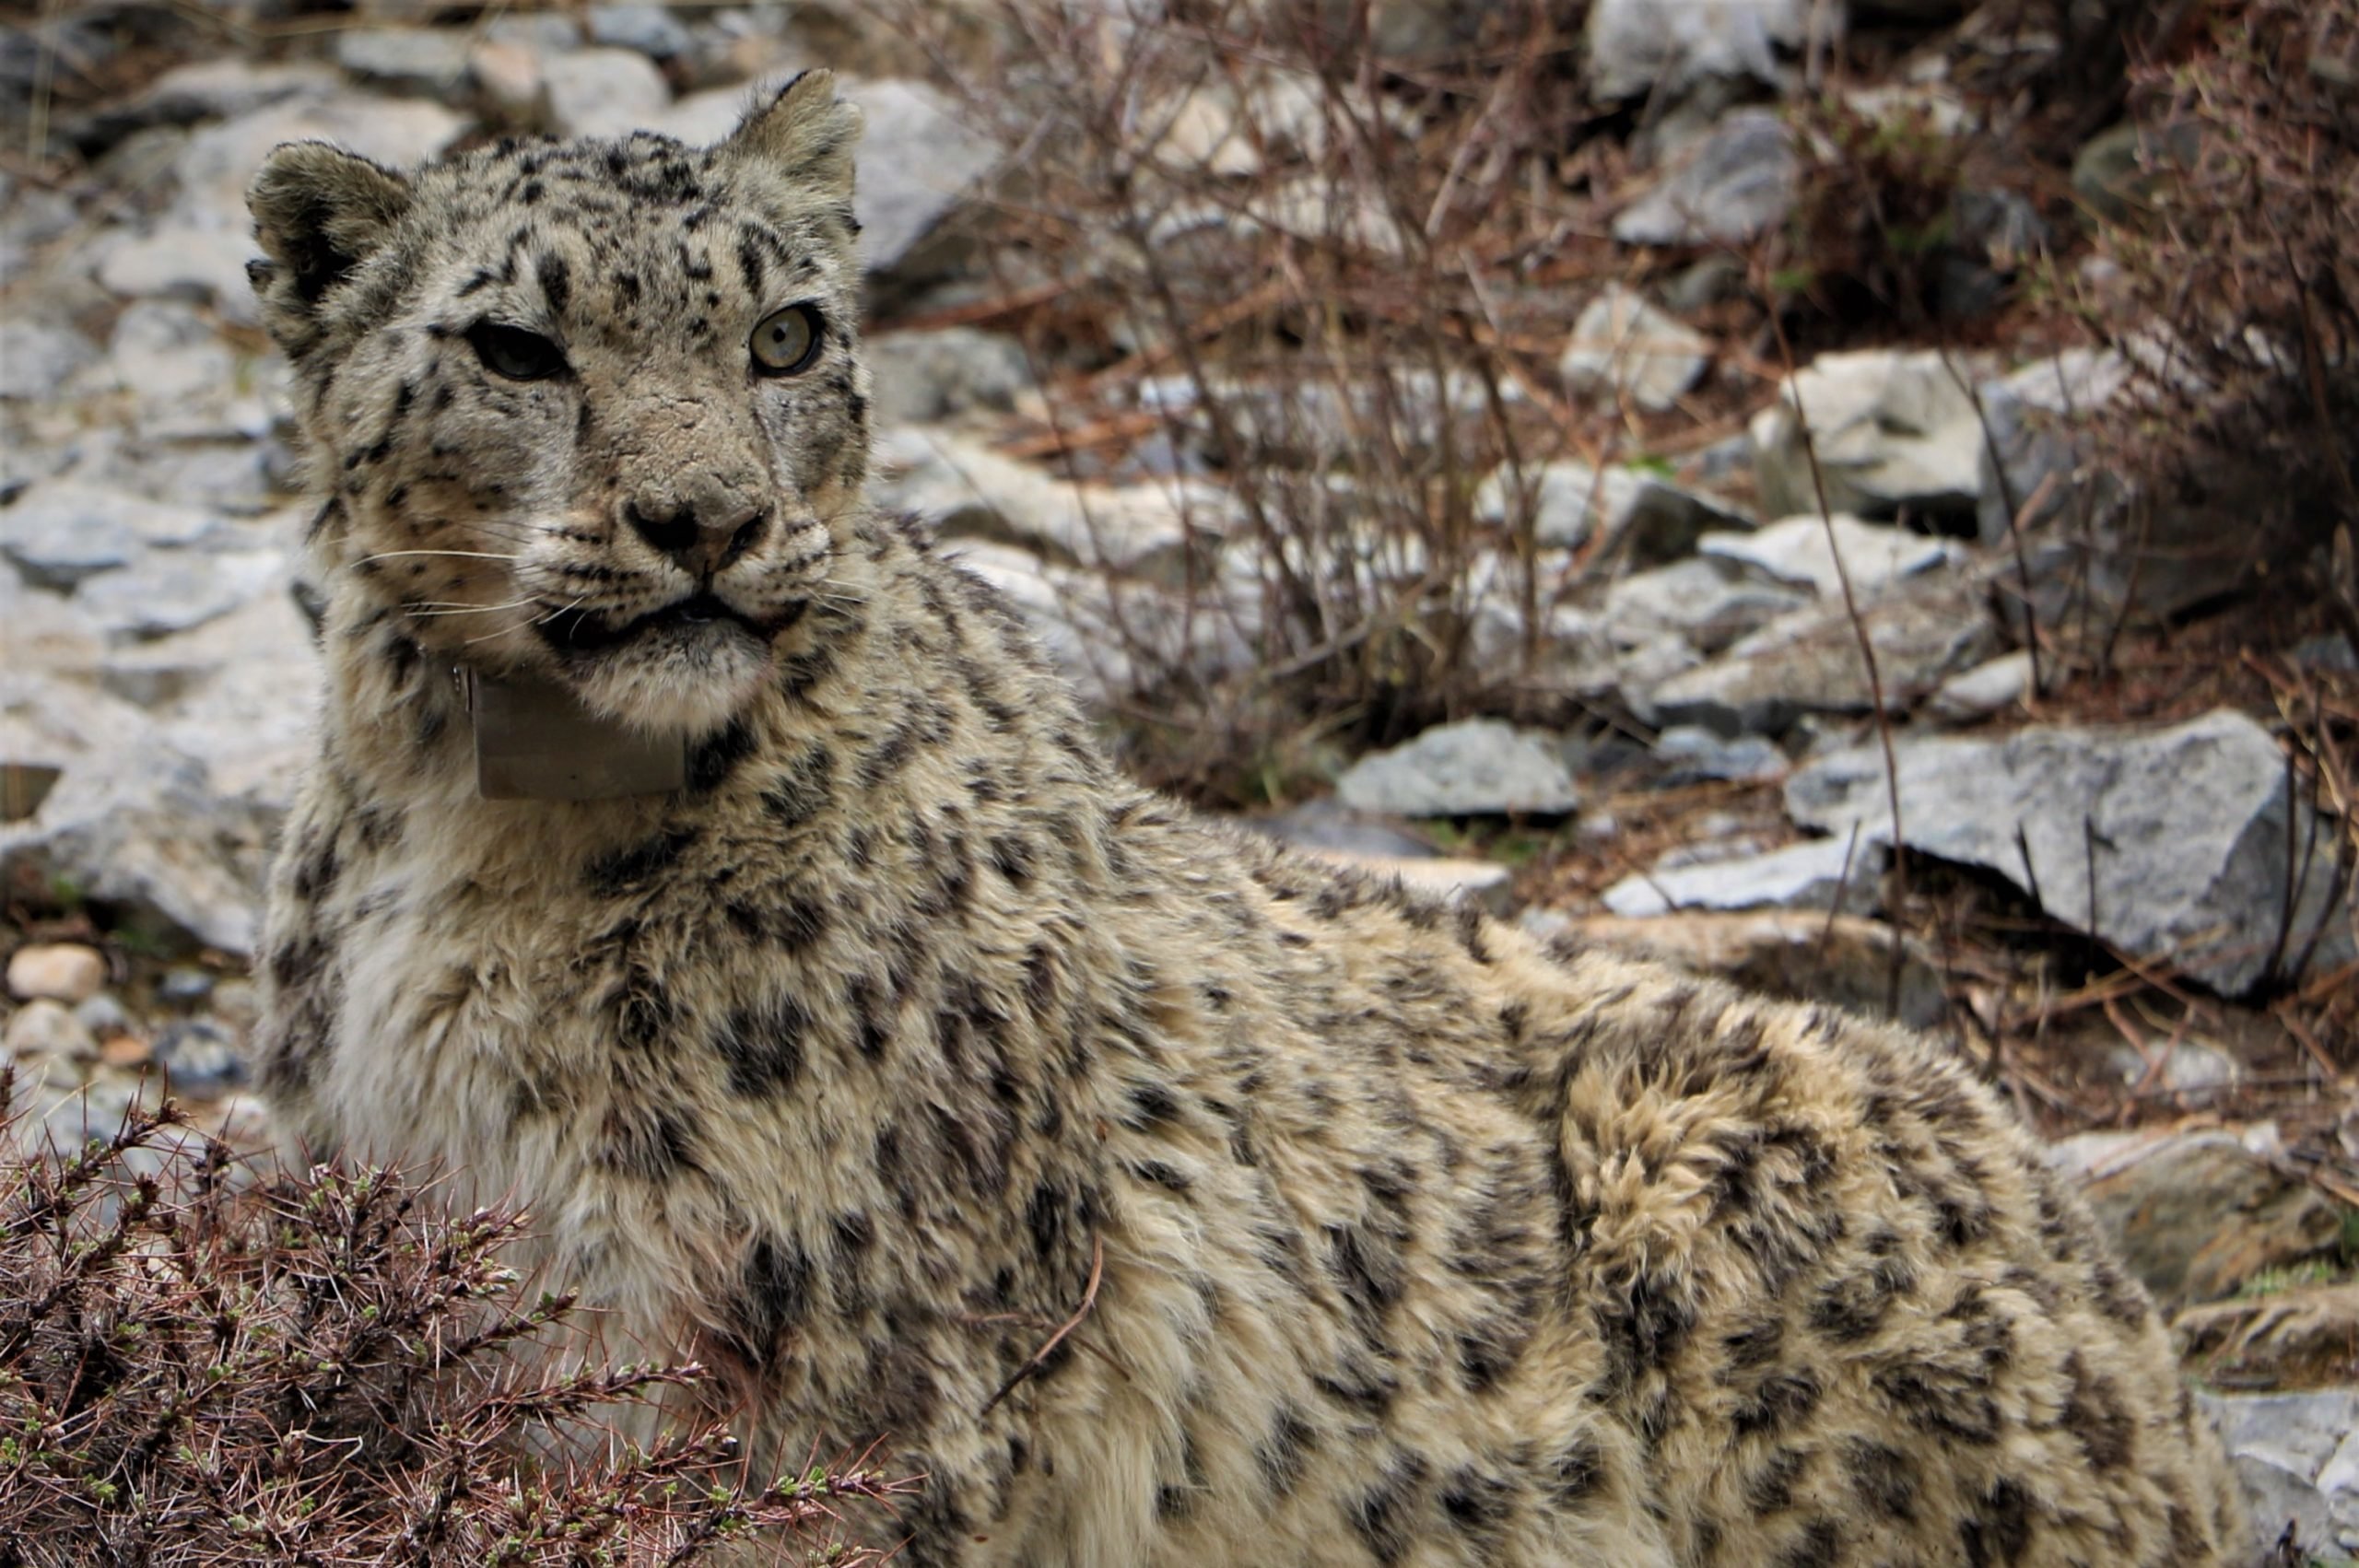 <p>Ghangri Gapi Hyul, the first snow leopard collared during the expedition in Nisyal, Nepal (Image: DNPWC / WWF Nepal)</p>